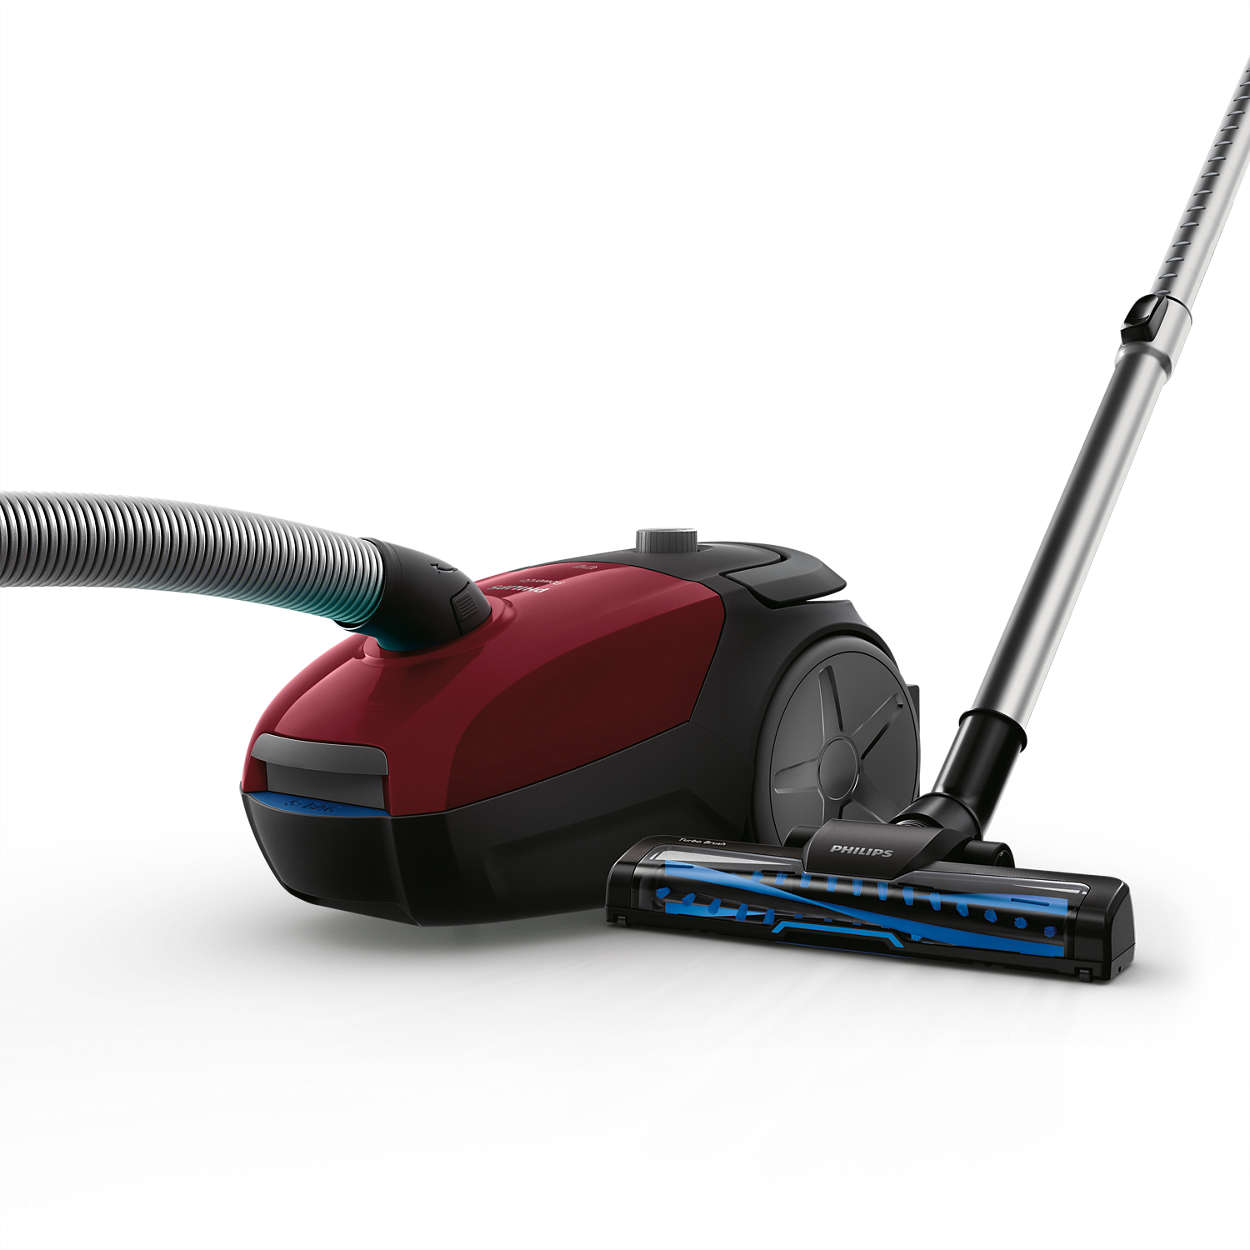 pawn lead Go up and down PowerGo Vacuum cleaner with bag FC8293/02 | Philips